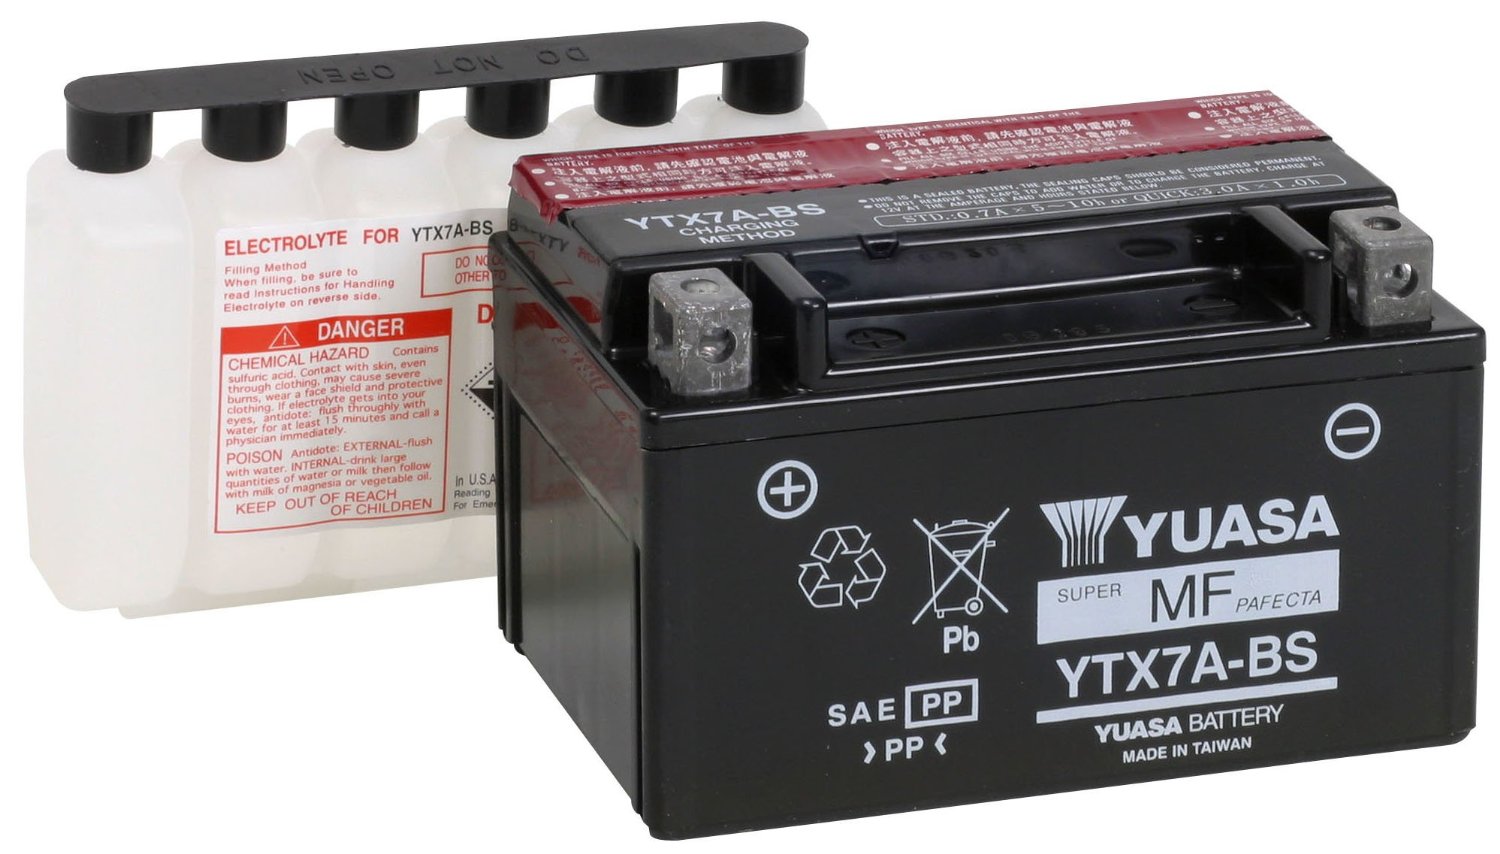 Battery Bly Qtx7a-bs - Ytx7a-bs